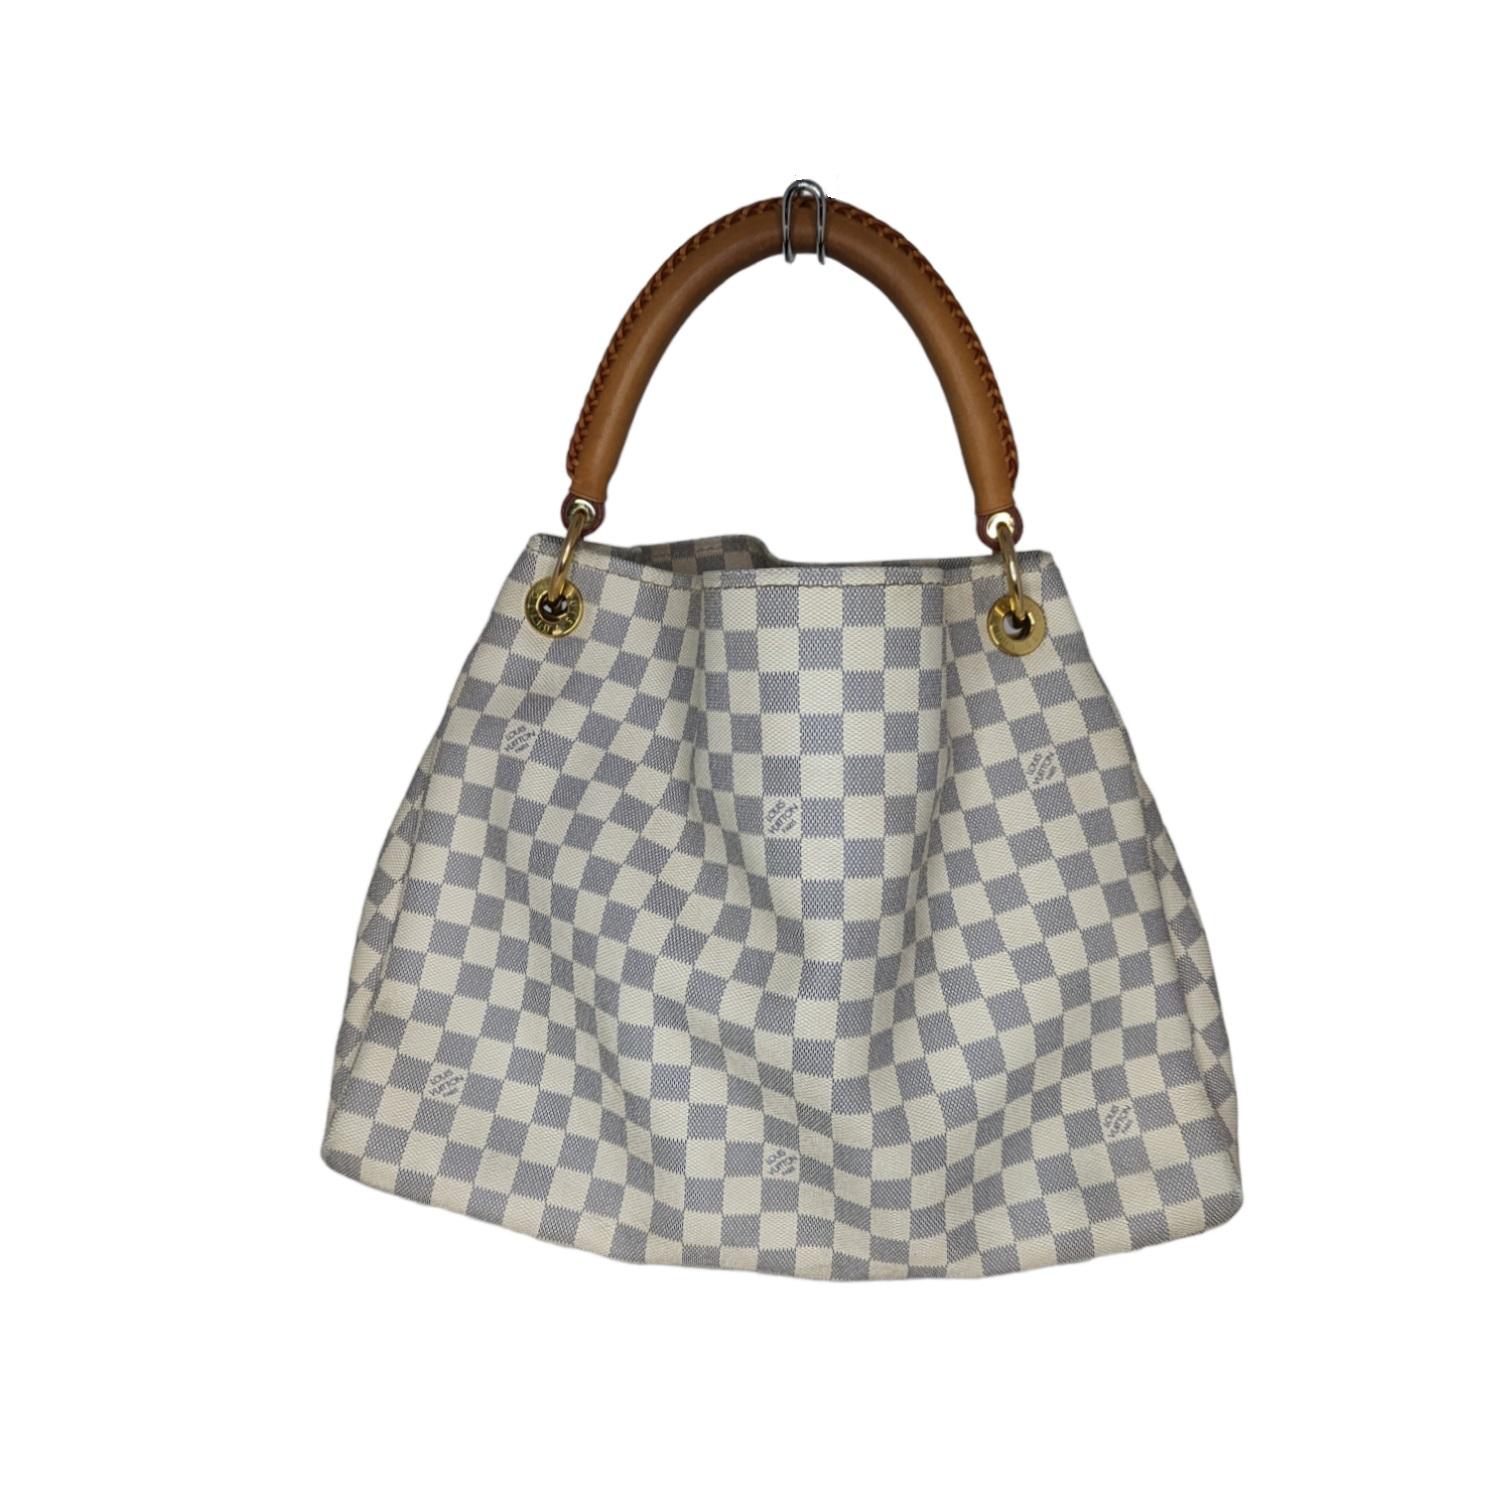 The Artsy MM looks fresh and feminine in supple Damier Azur canvas. Adorned with shiny golden brass and a chic bag charm, its exquisite handcrafted leather handle adds a luxurious crowning touch. Retail $2,500.

Designer: Louis Vuitton
Material: